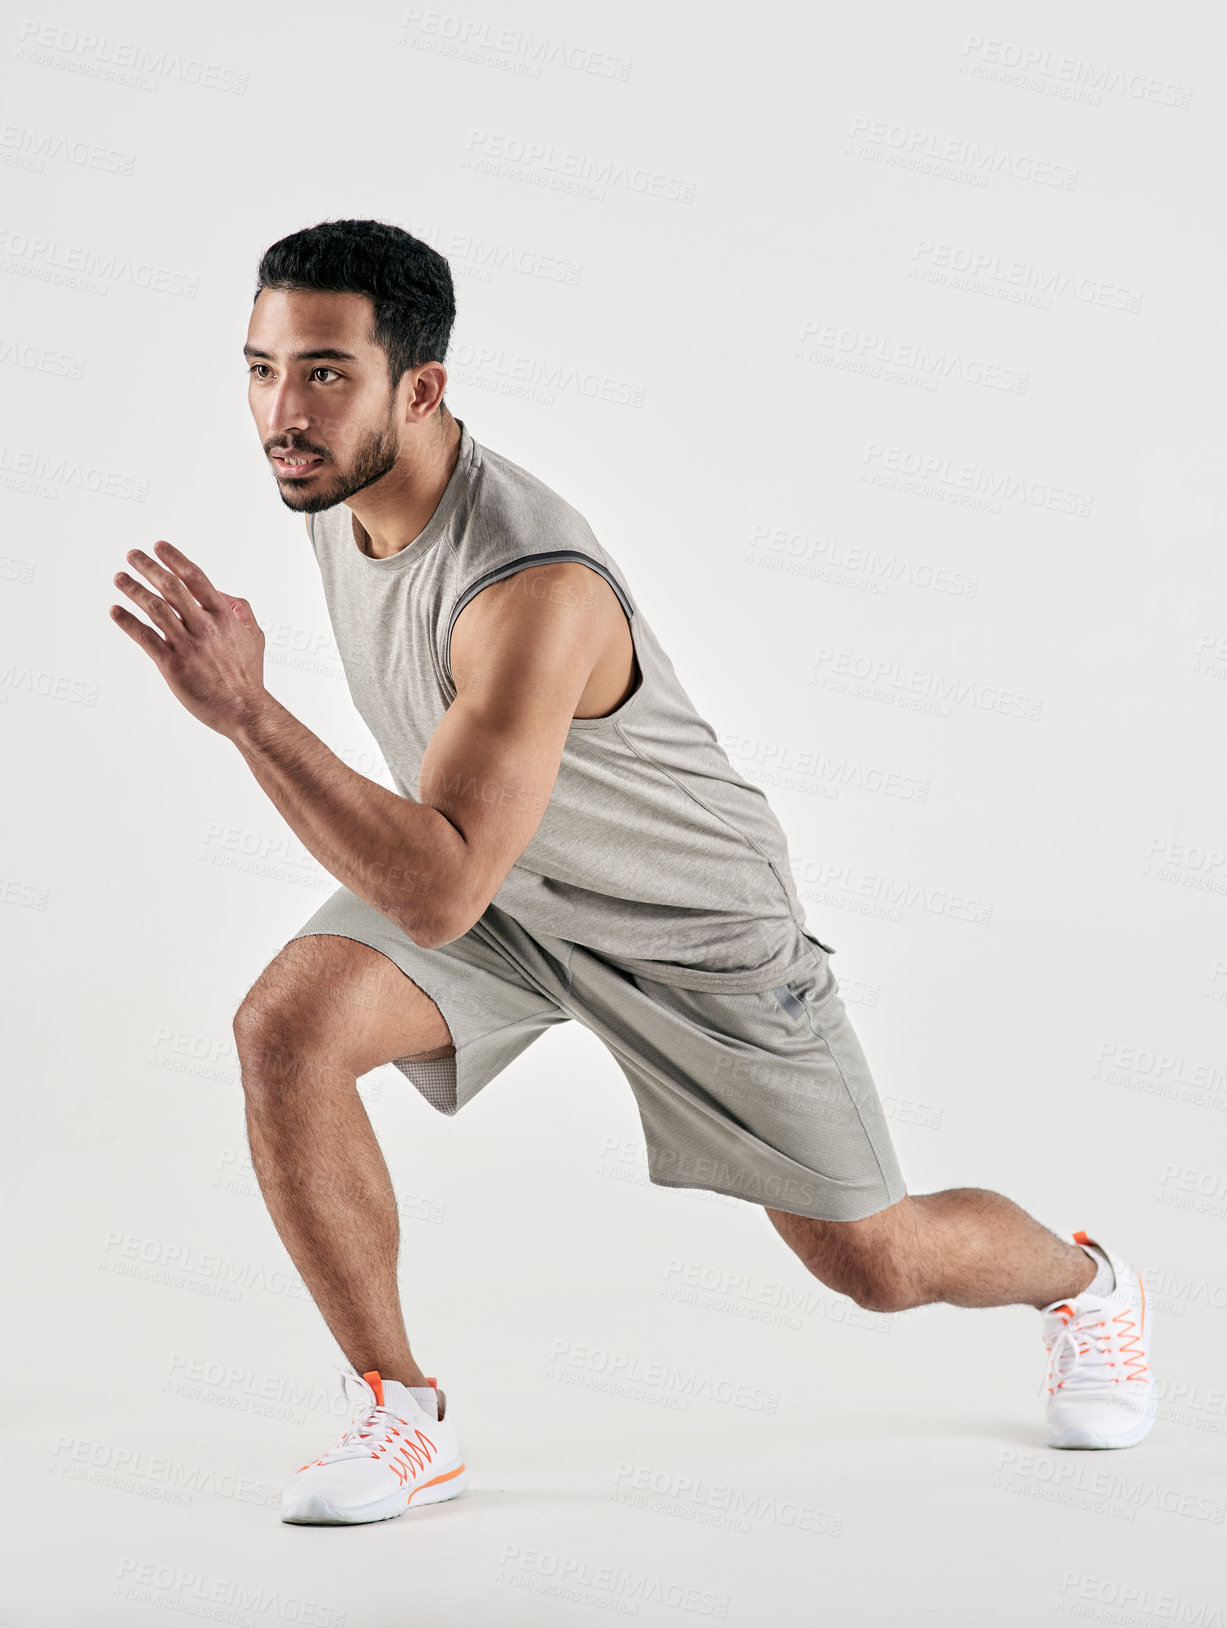 Buy stock photo Studio shot of a sporty young man running against a white background